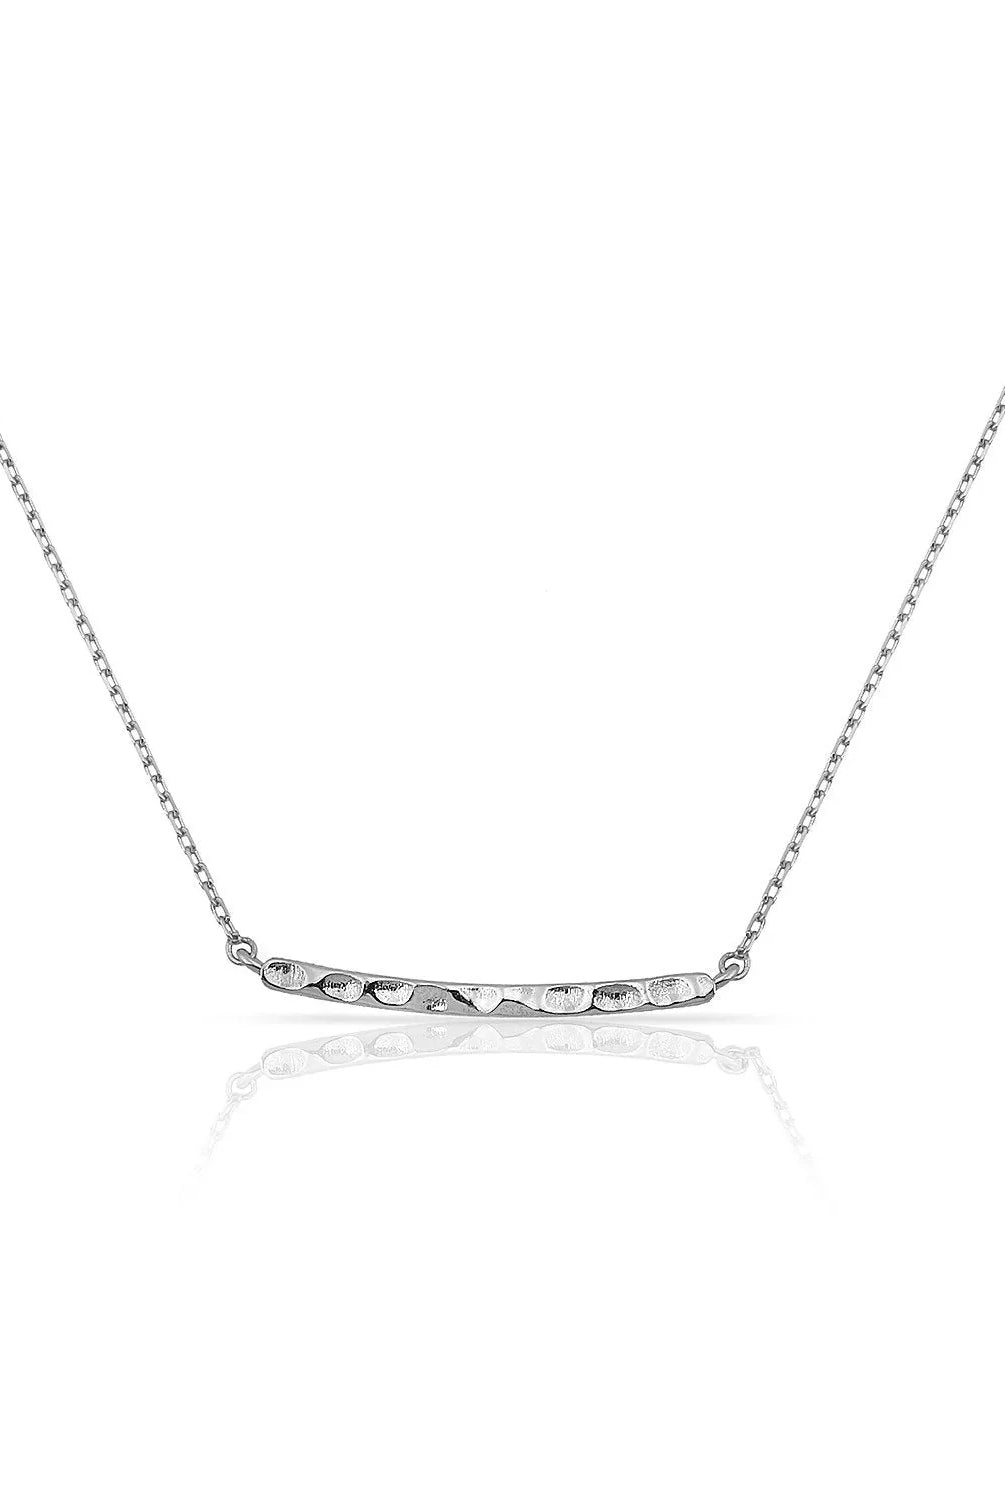 Loverly Hammered Bar Necklace-JEWELRY-The Sis Kiss®-Urban Threadz Boutique, Women's Fashion Boutique in Saugatuck, MI